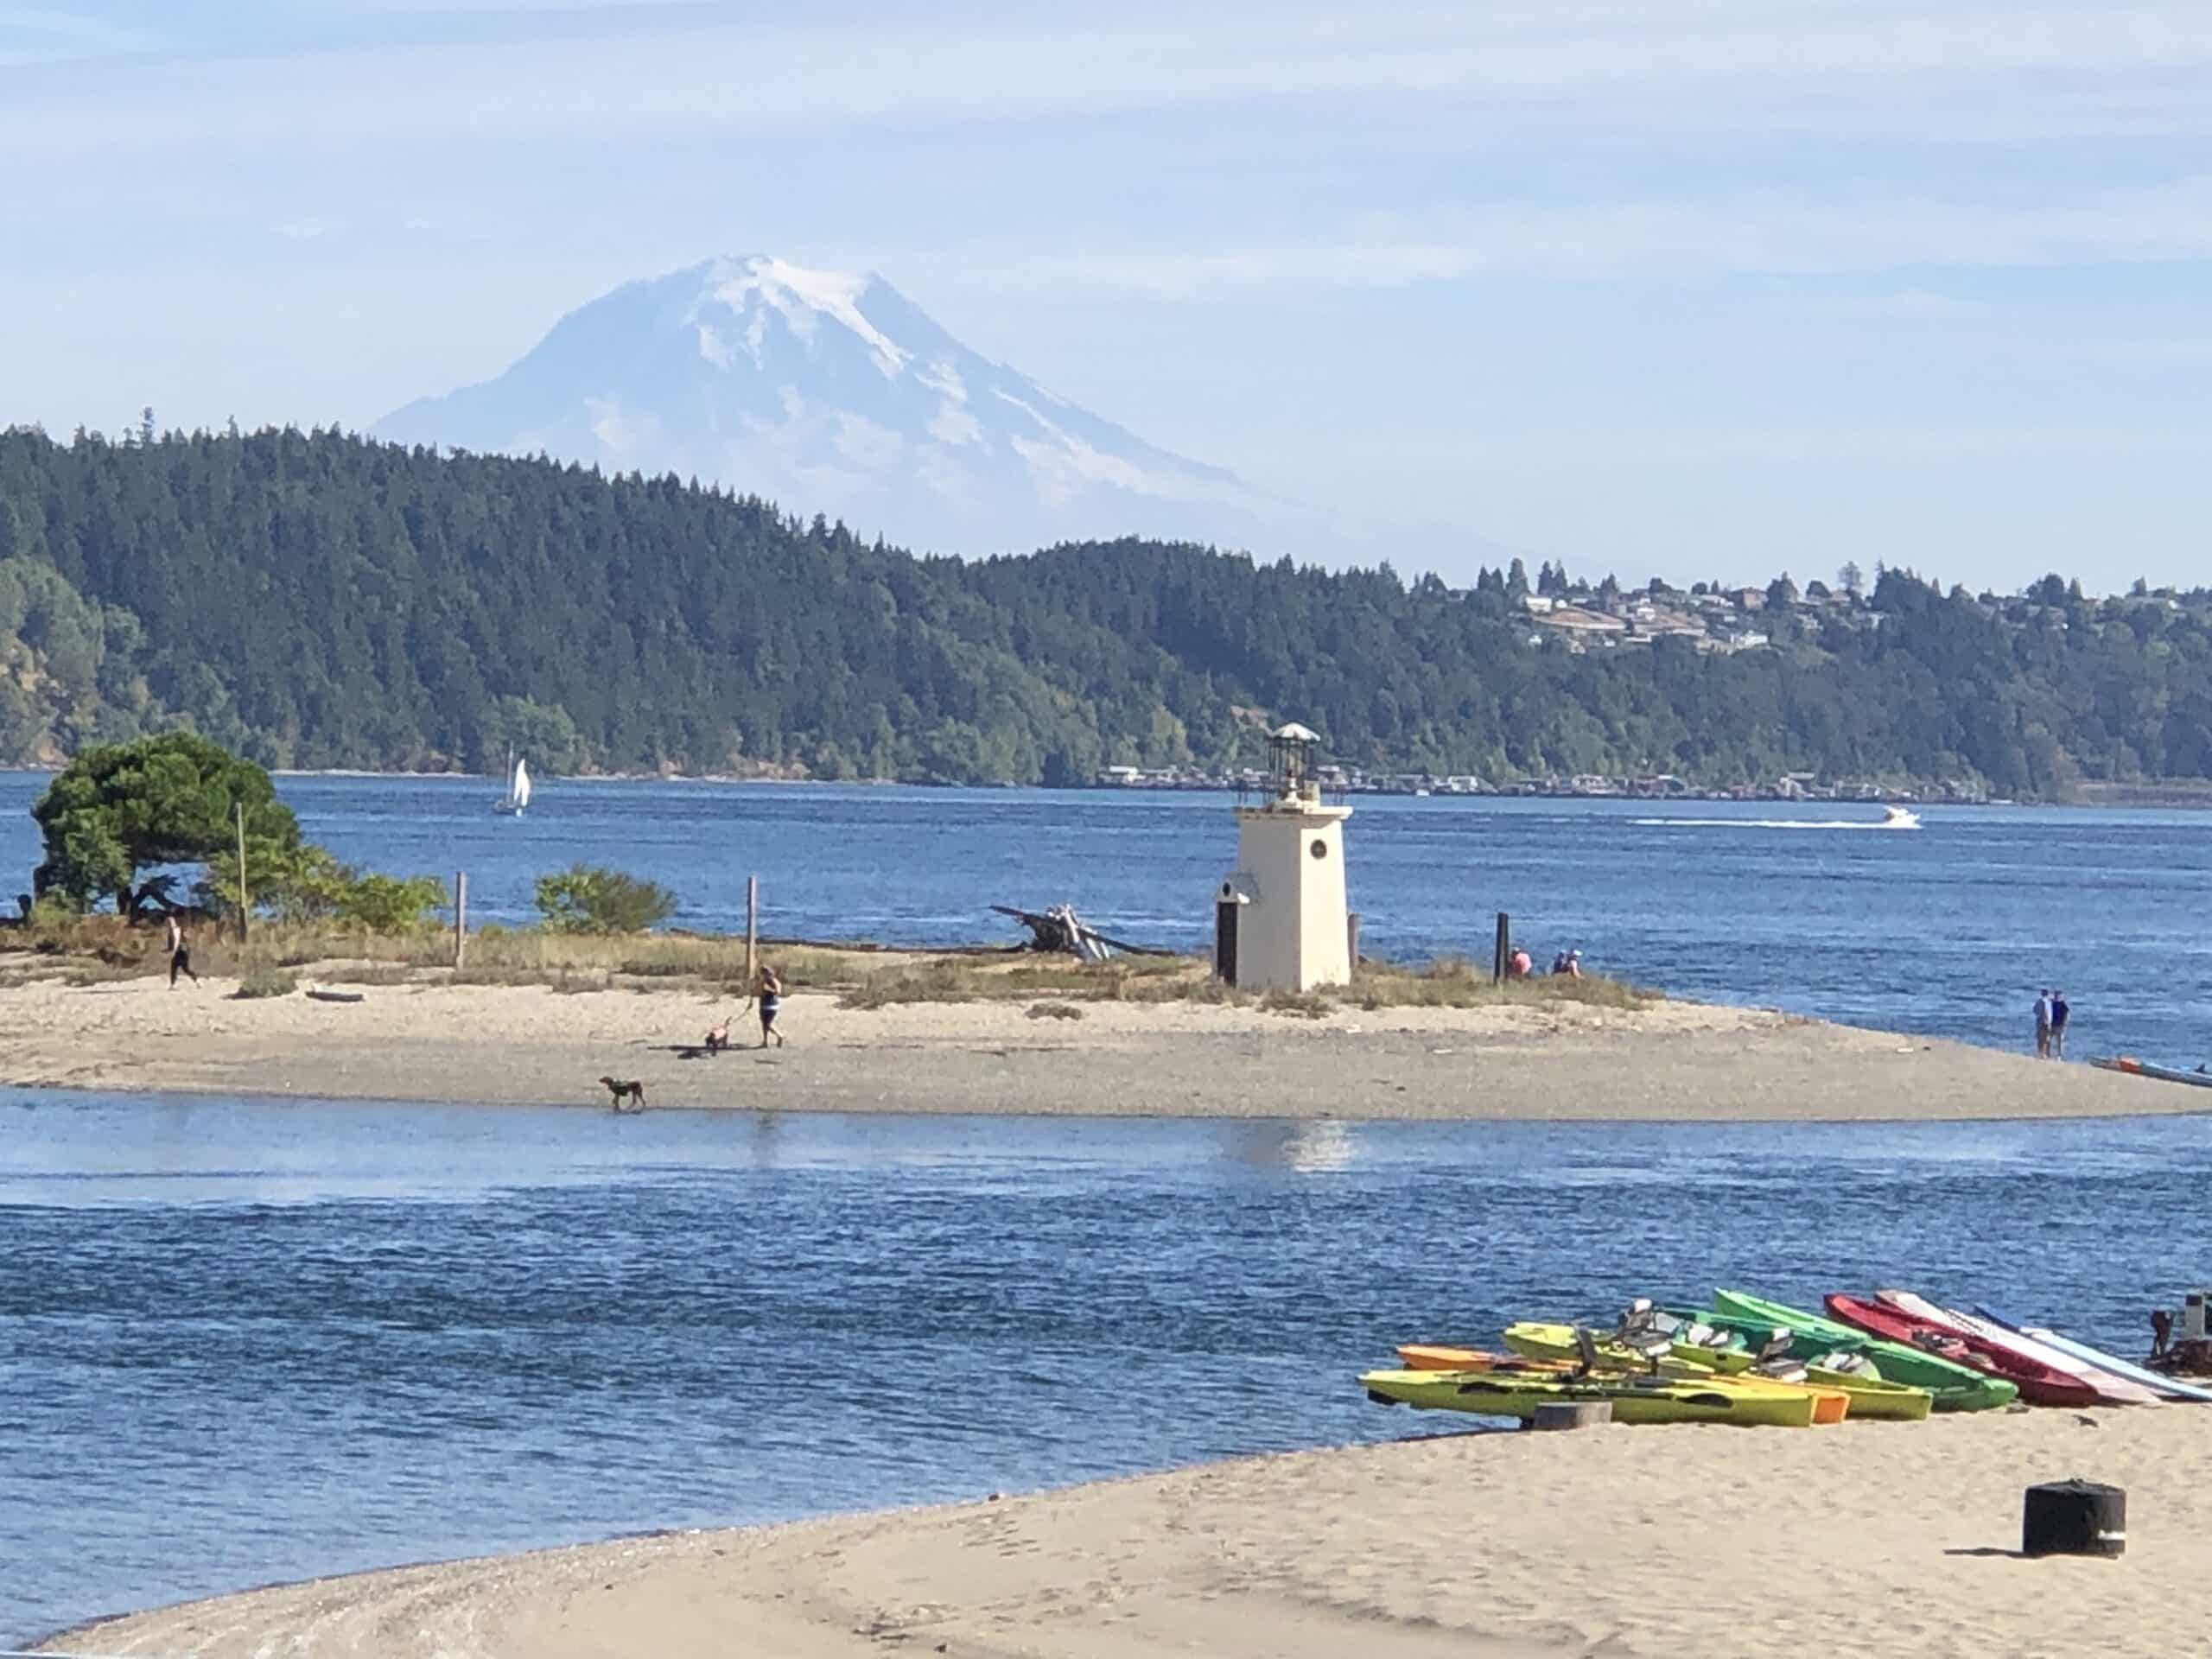 The property overlooks the lighthouse at the entrance to the harbor and is backdropped by Puget Sound and Mount Rainier,